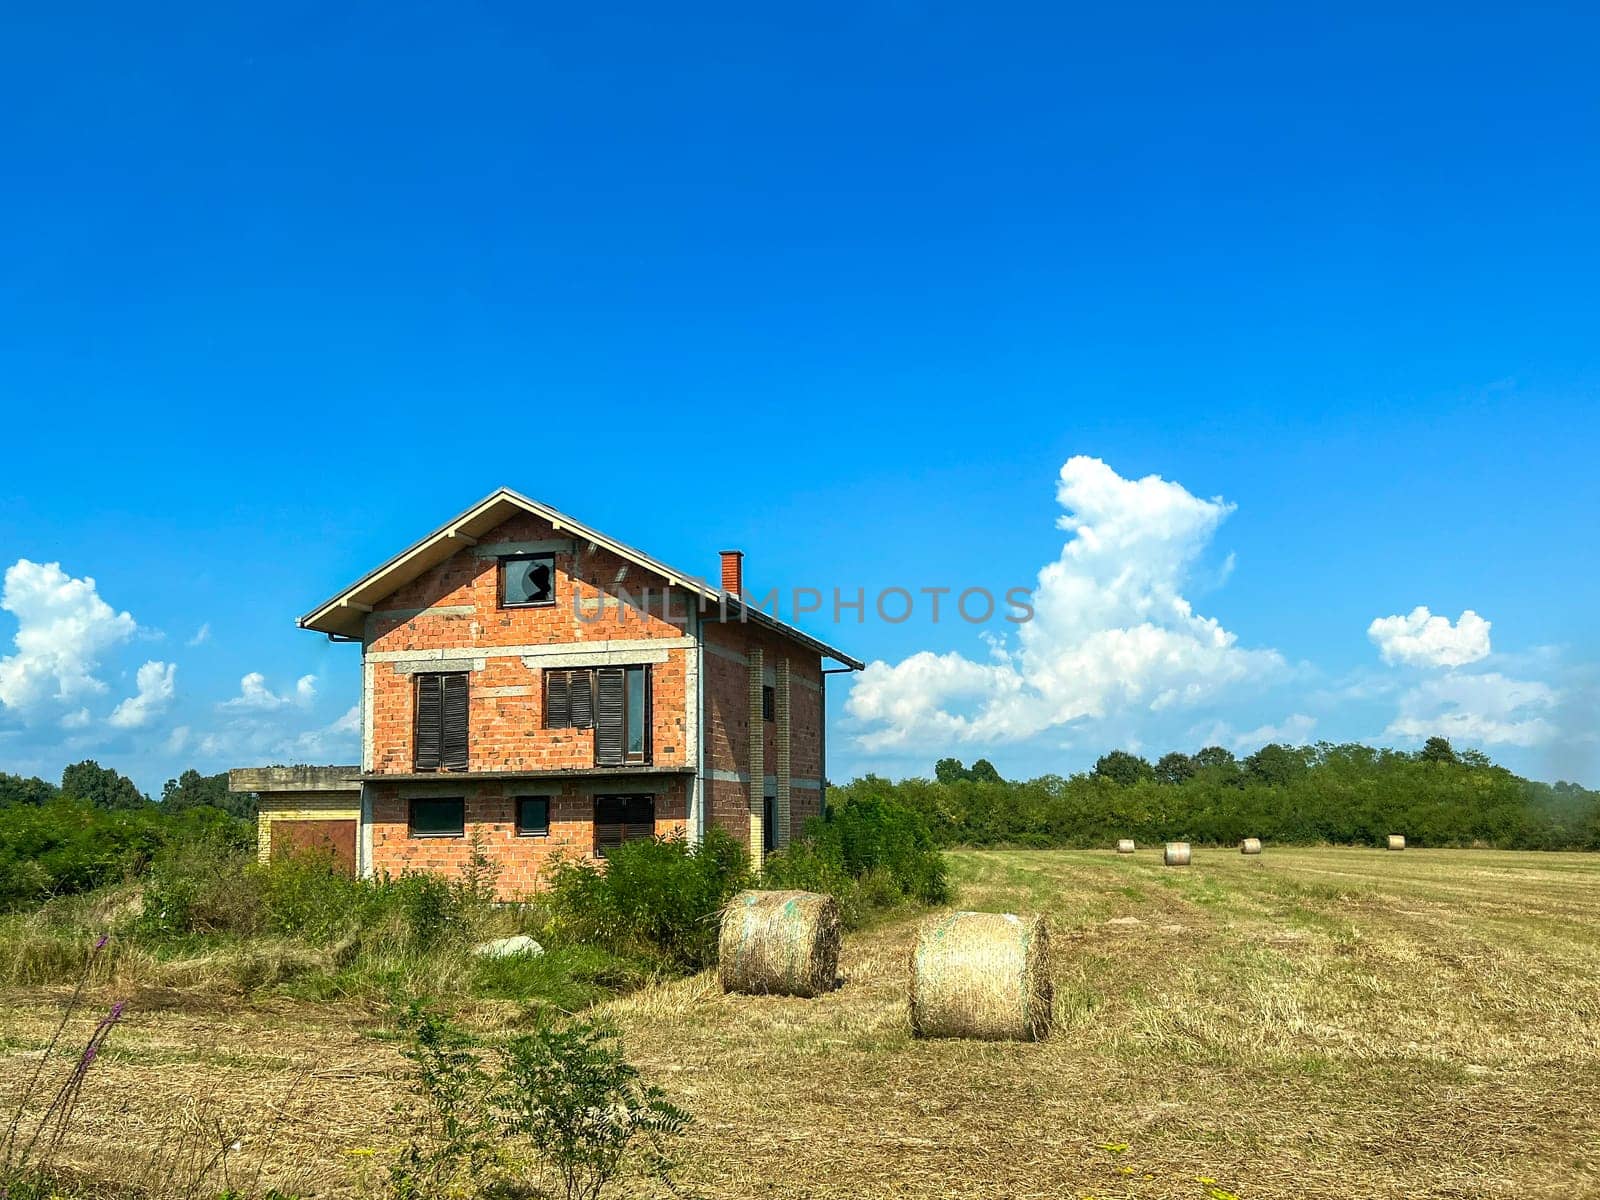 A non finished countryside house in Bosnia country